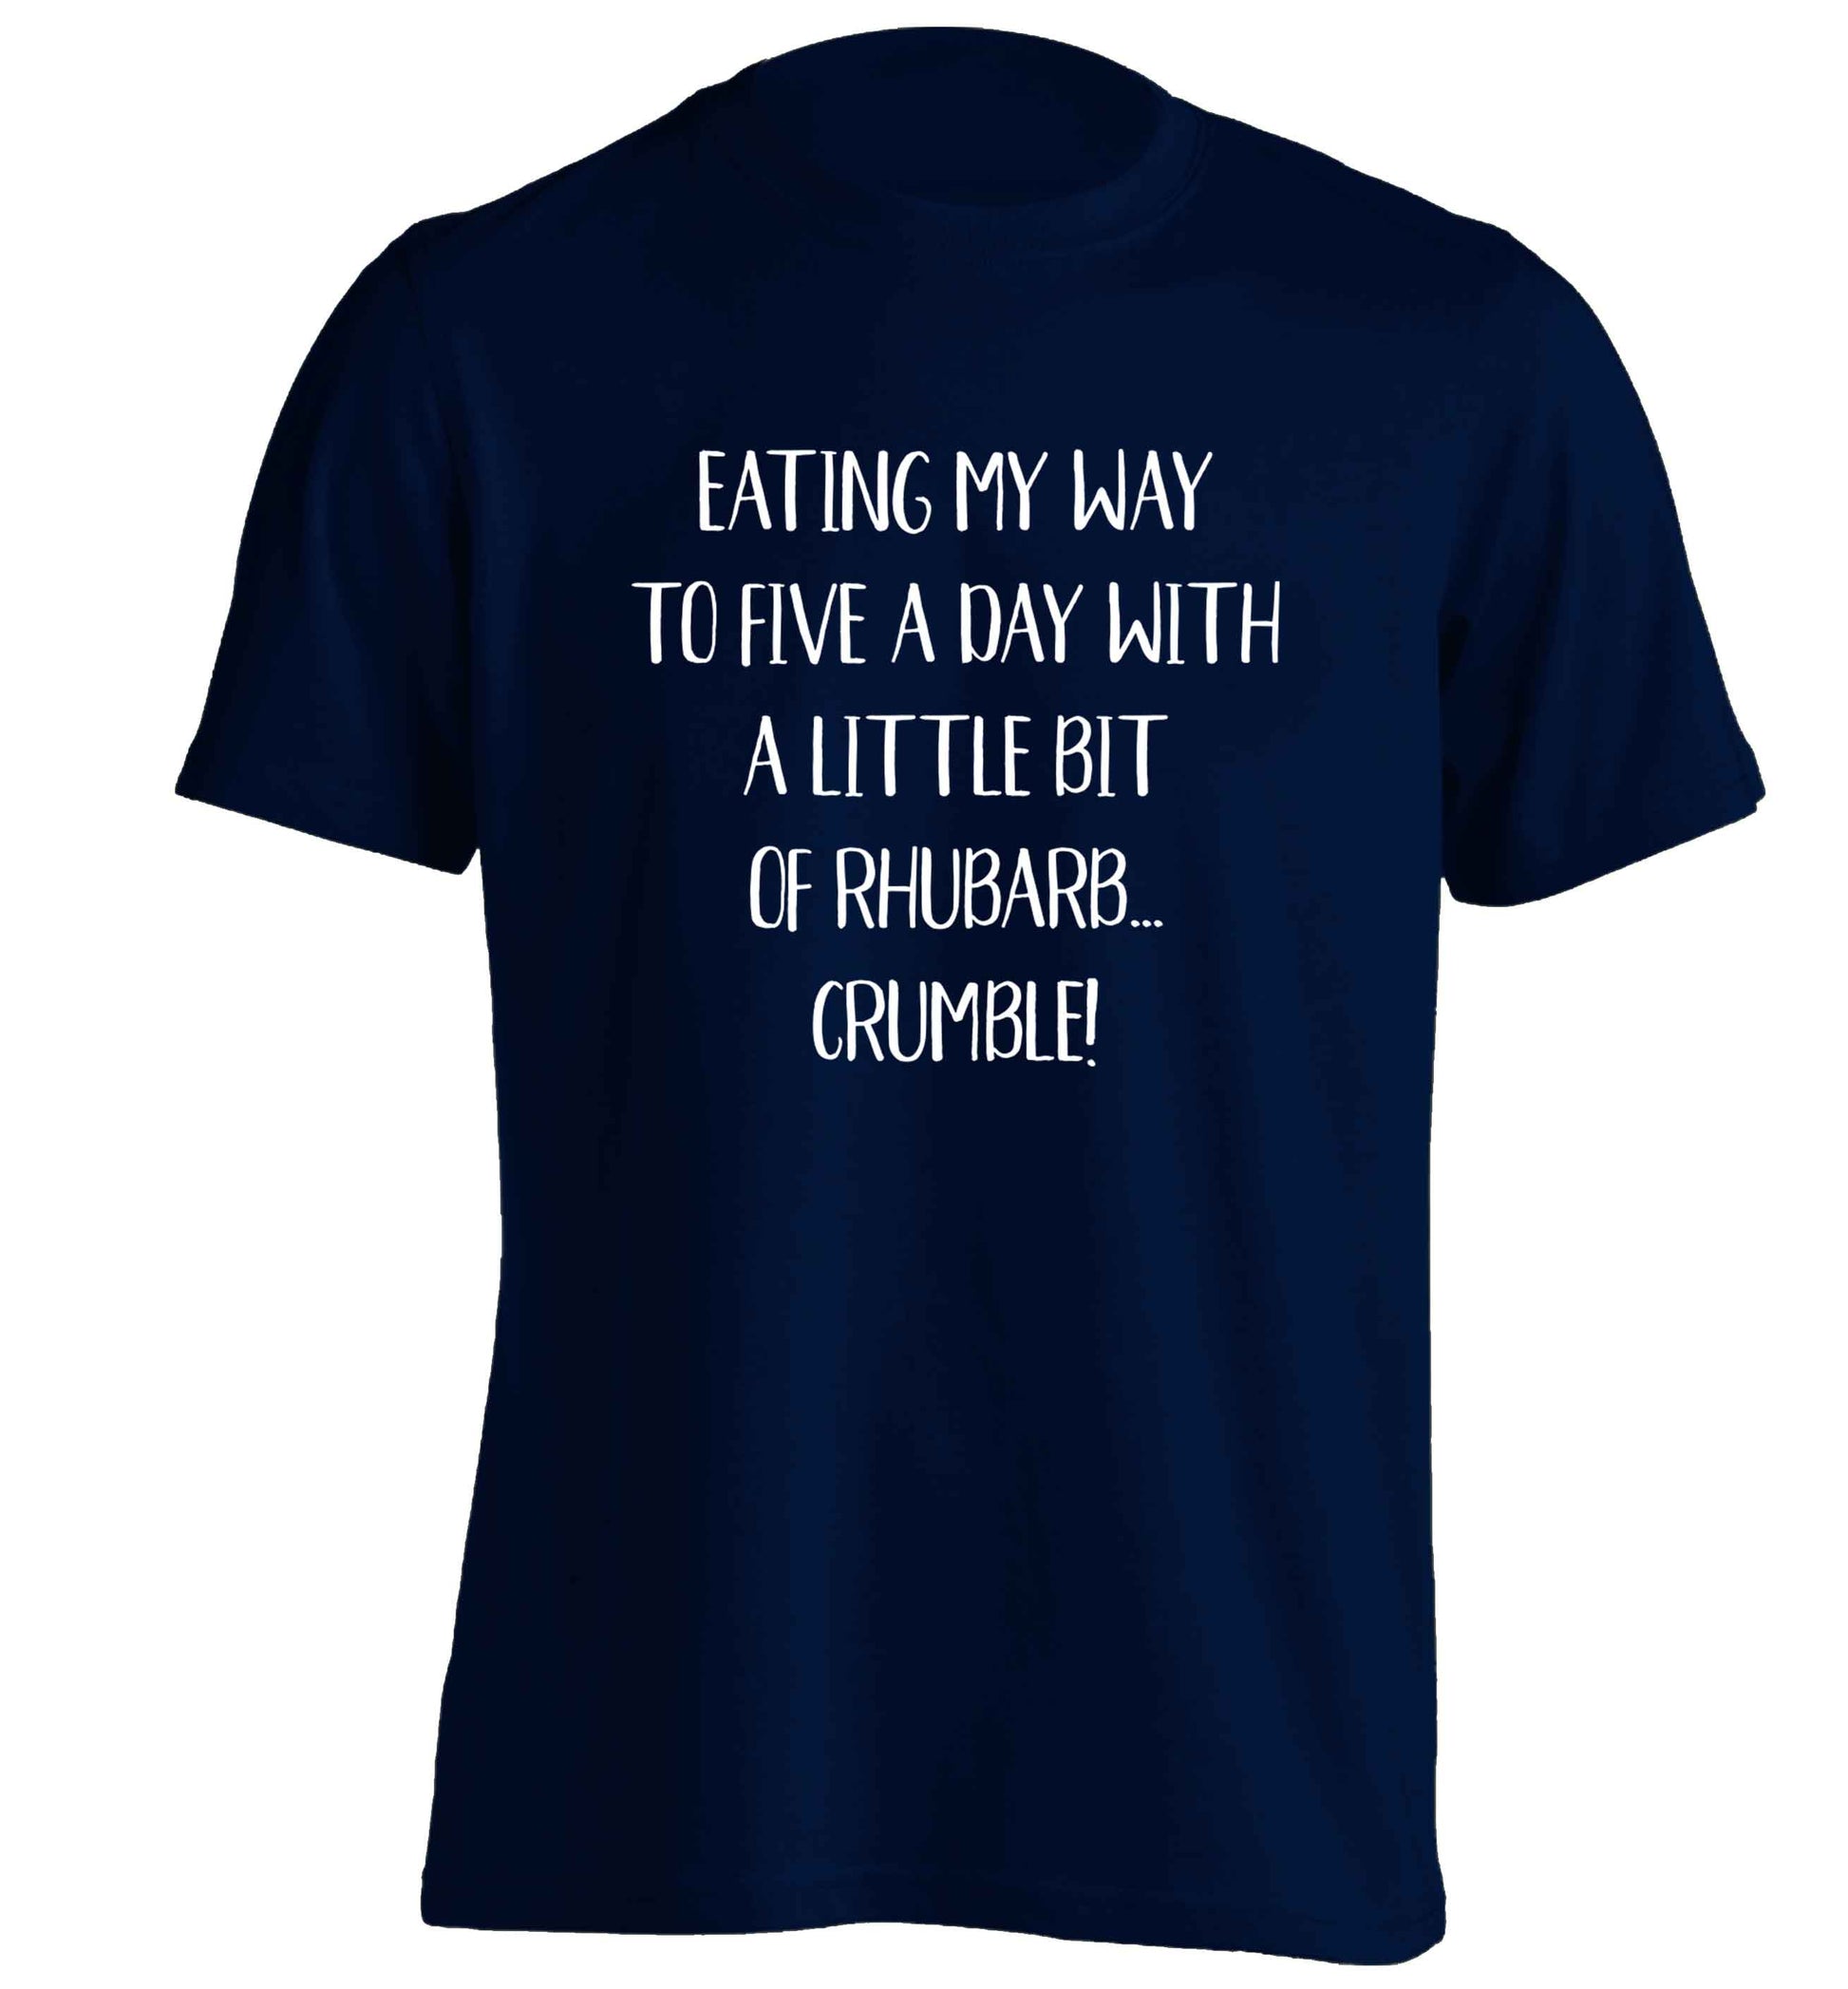 Eating my way to five a day with a little bit of rhubarb crumble adults unisex navy Tshirt 2XL